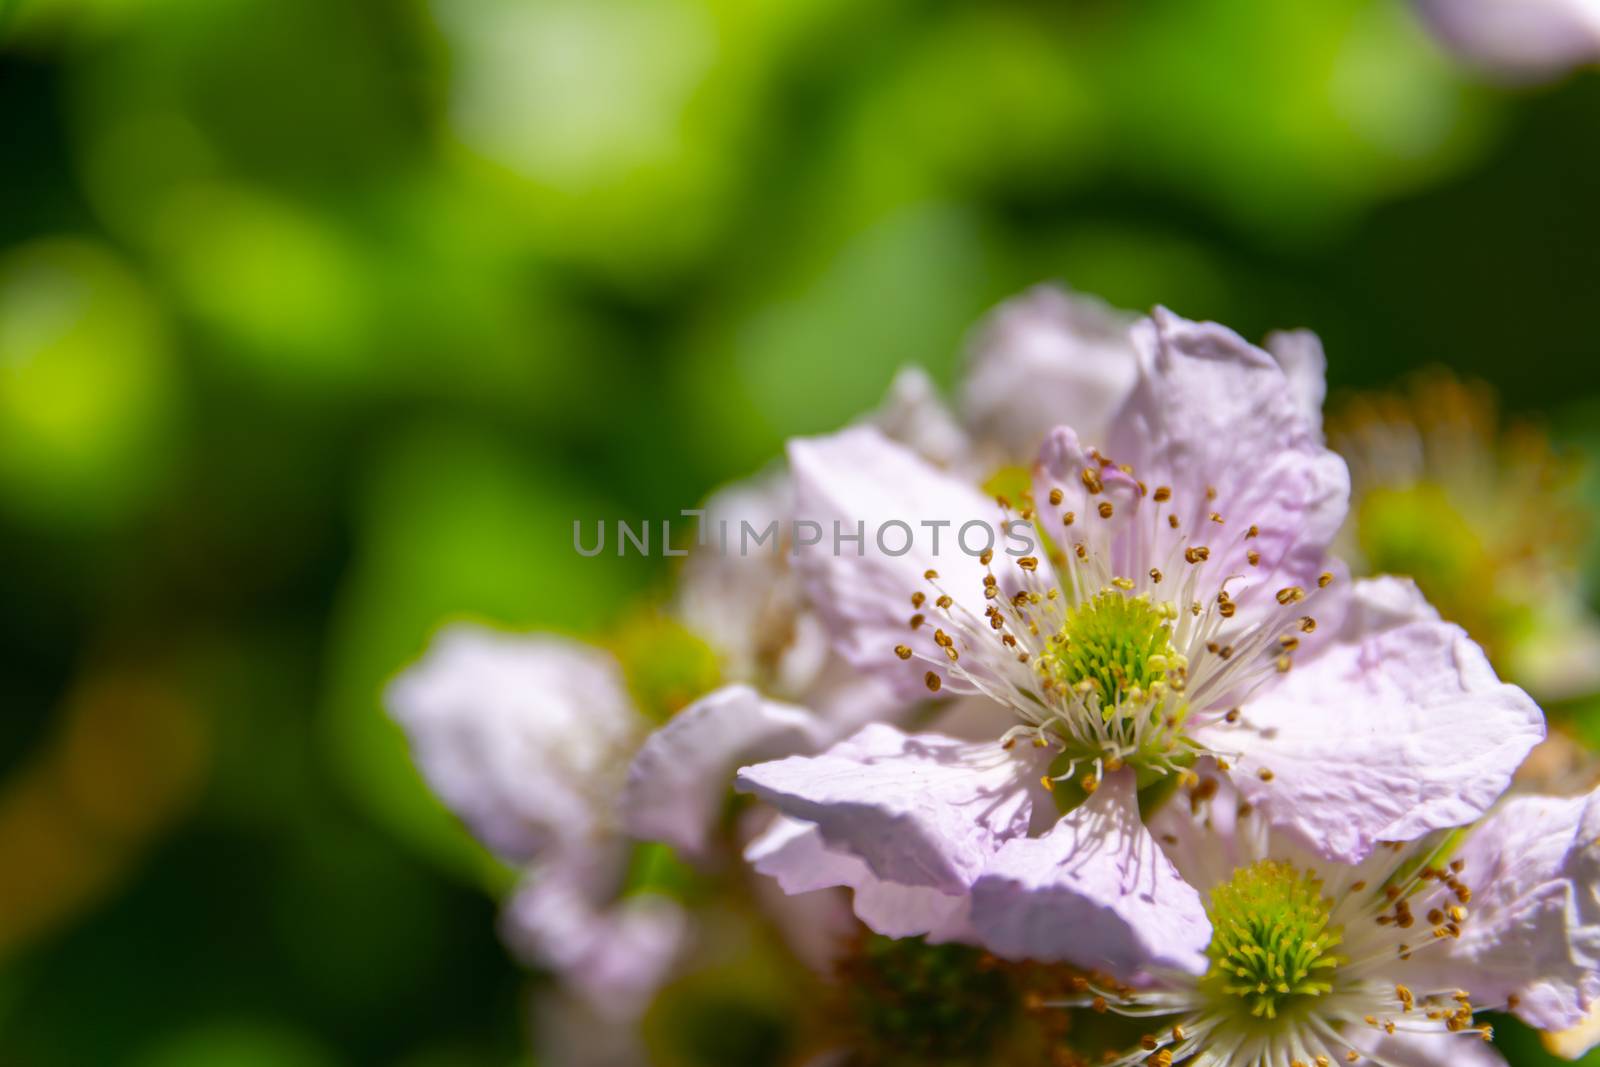 Framboise flower heads during sprintime. Macro shot, detail and close-up by kb79